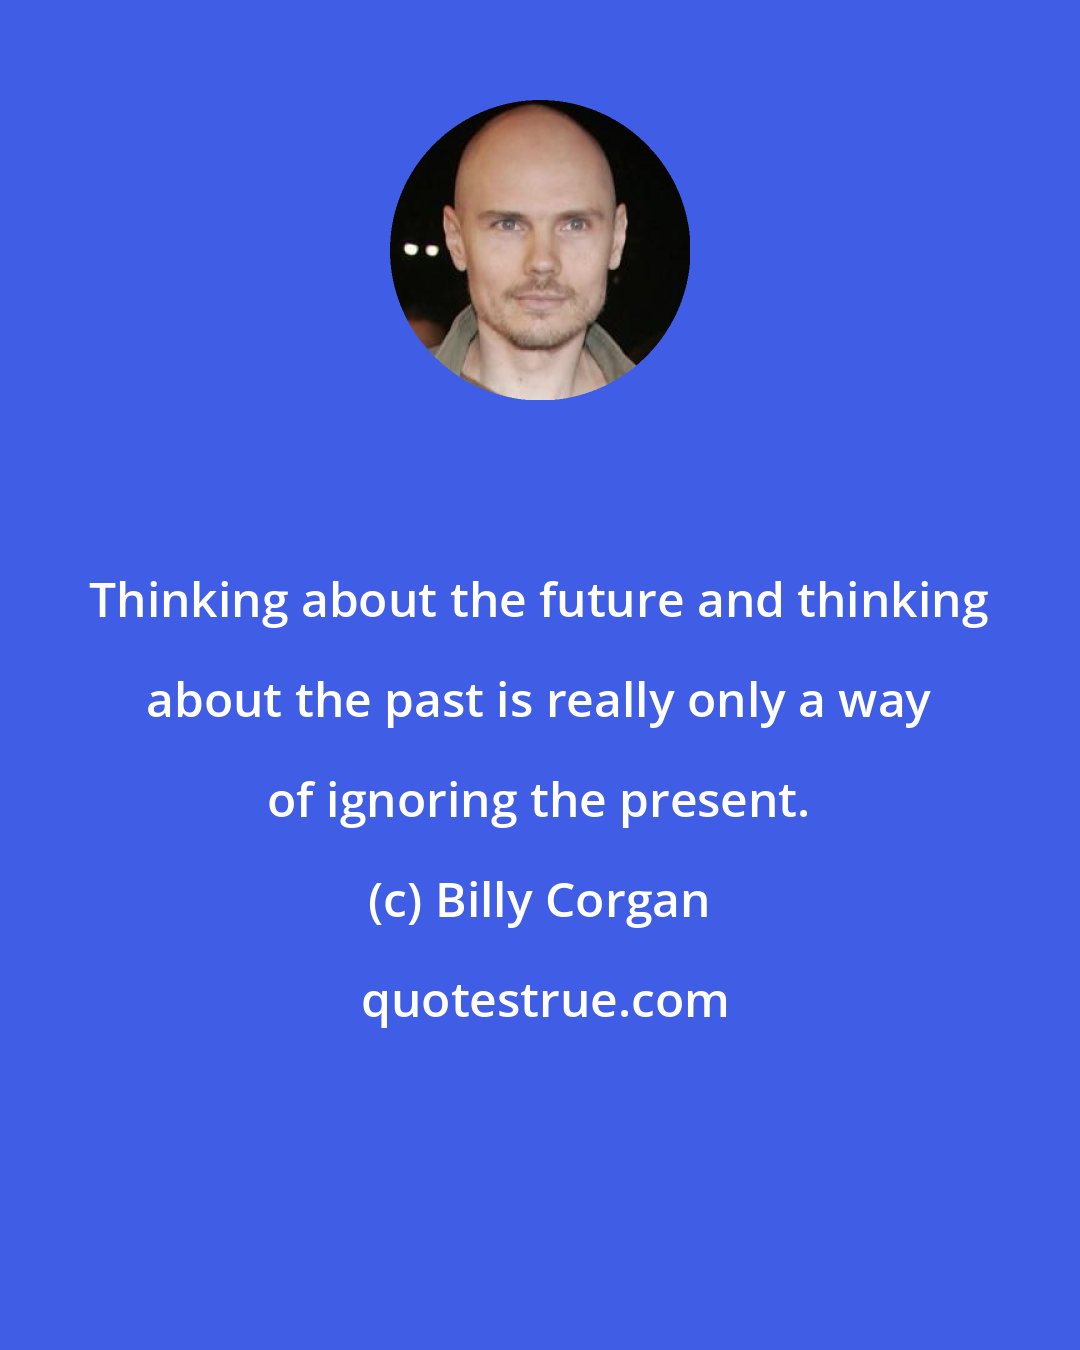 Billy Corgan: Thinking about the future and thinking about the past is really only a way of ignoring the present.